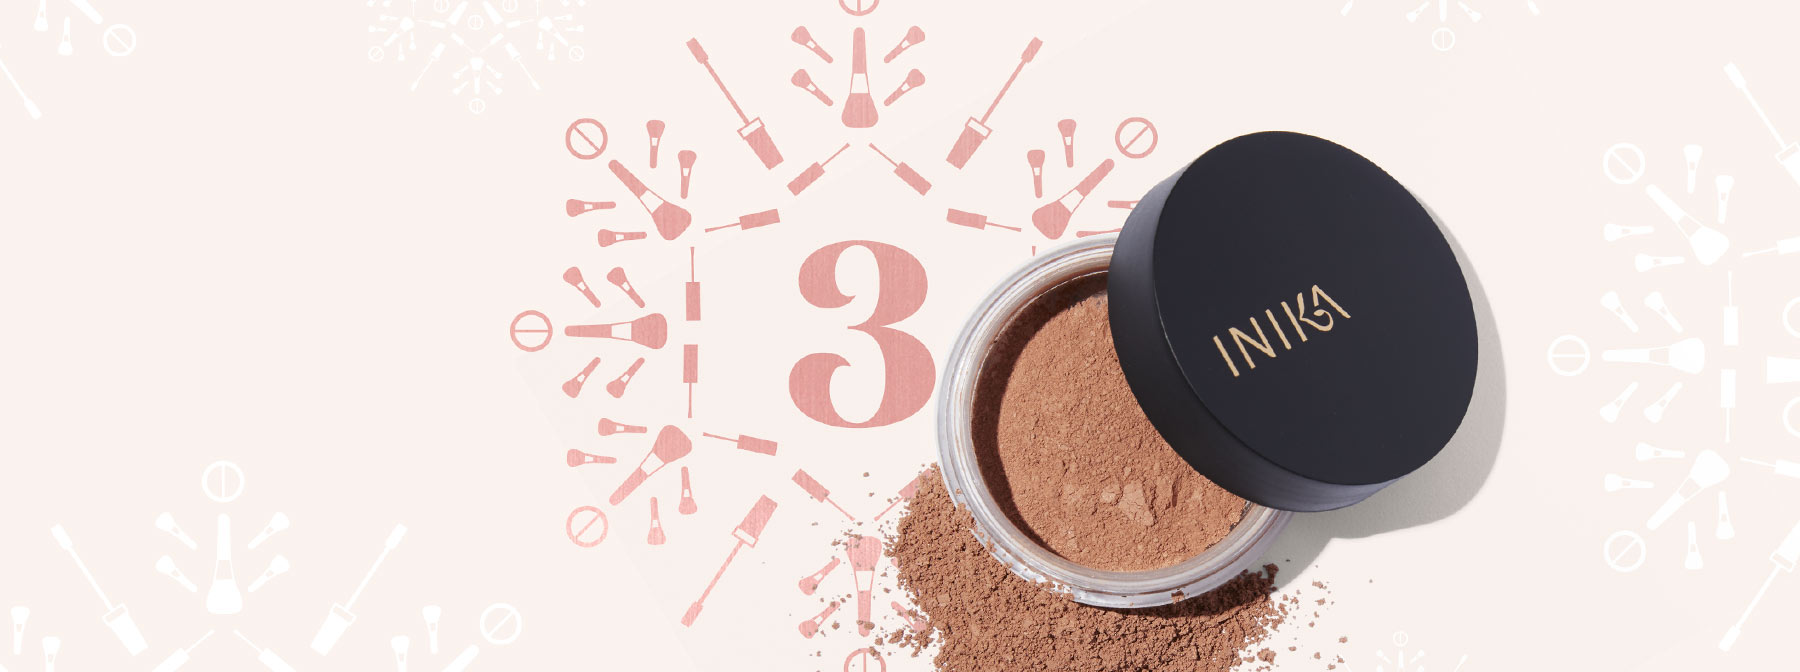 Winter Makeup: Day 3 – Why Use An INIKA Mineral Blush?